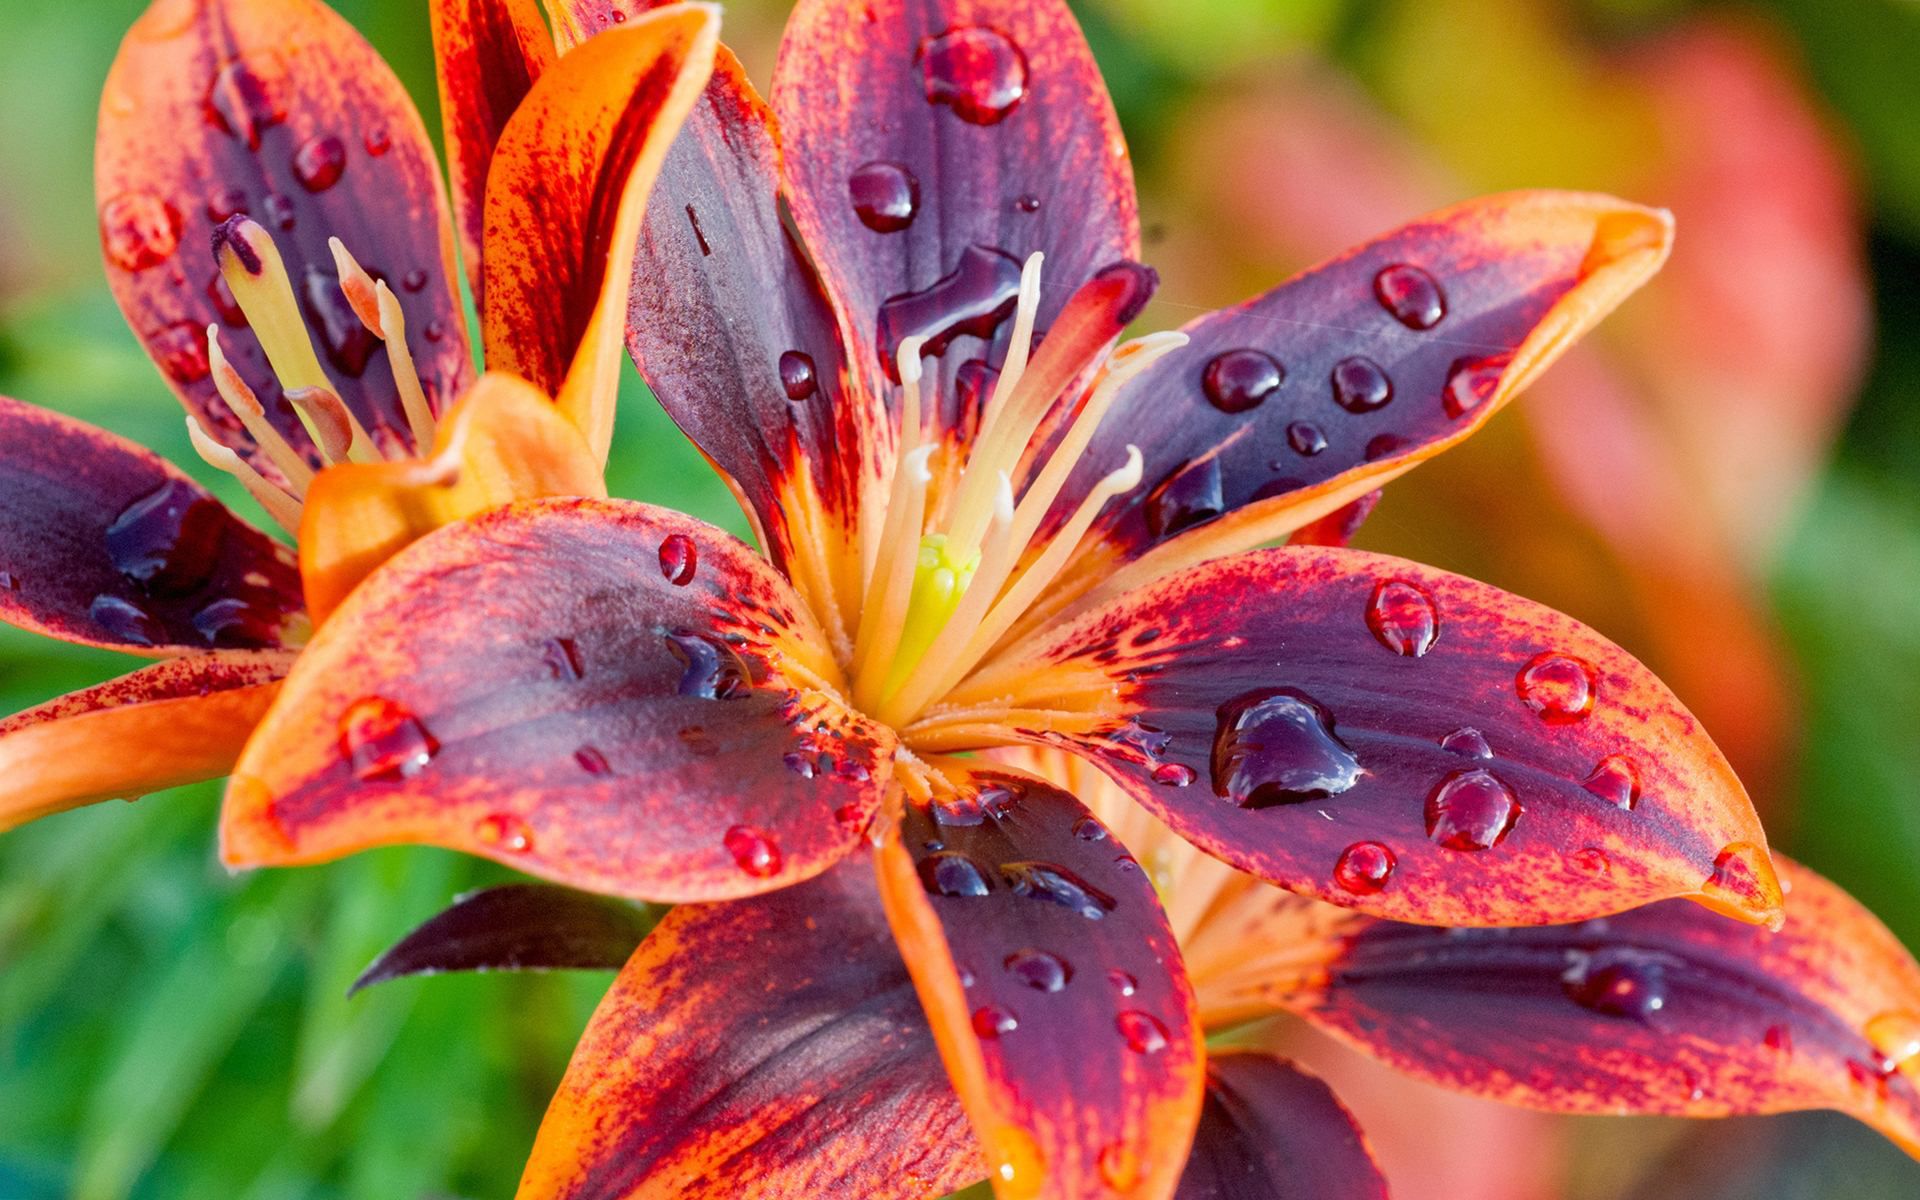 Download the following Gorgeous Lily Flower Wallpaper 1565 by clicking the button positioned underneath the "Download Wallpaper" section.